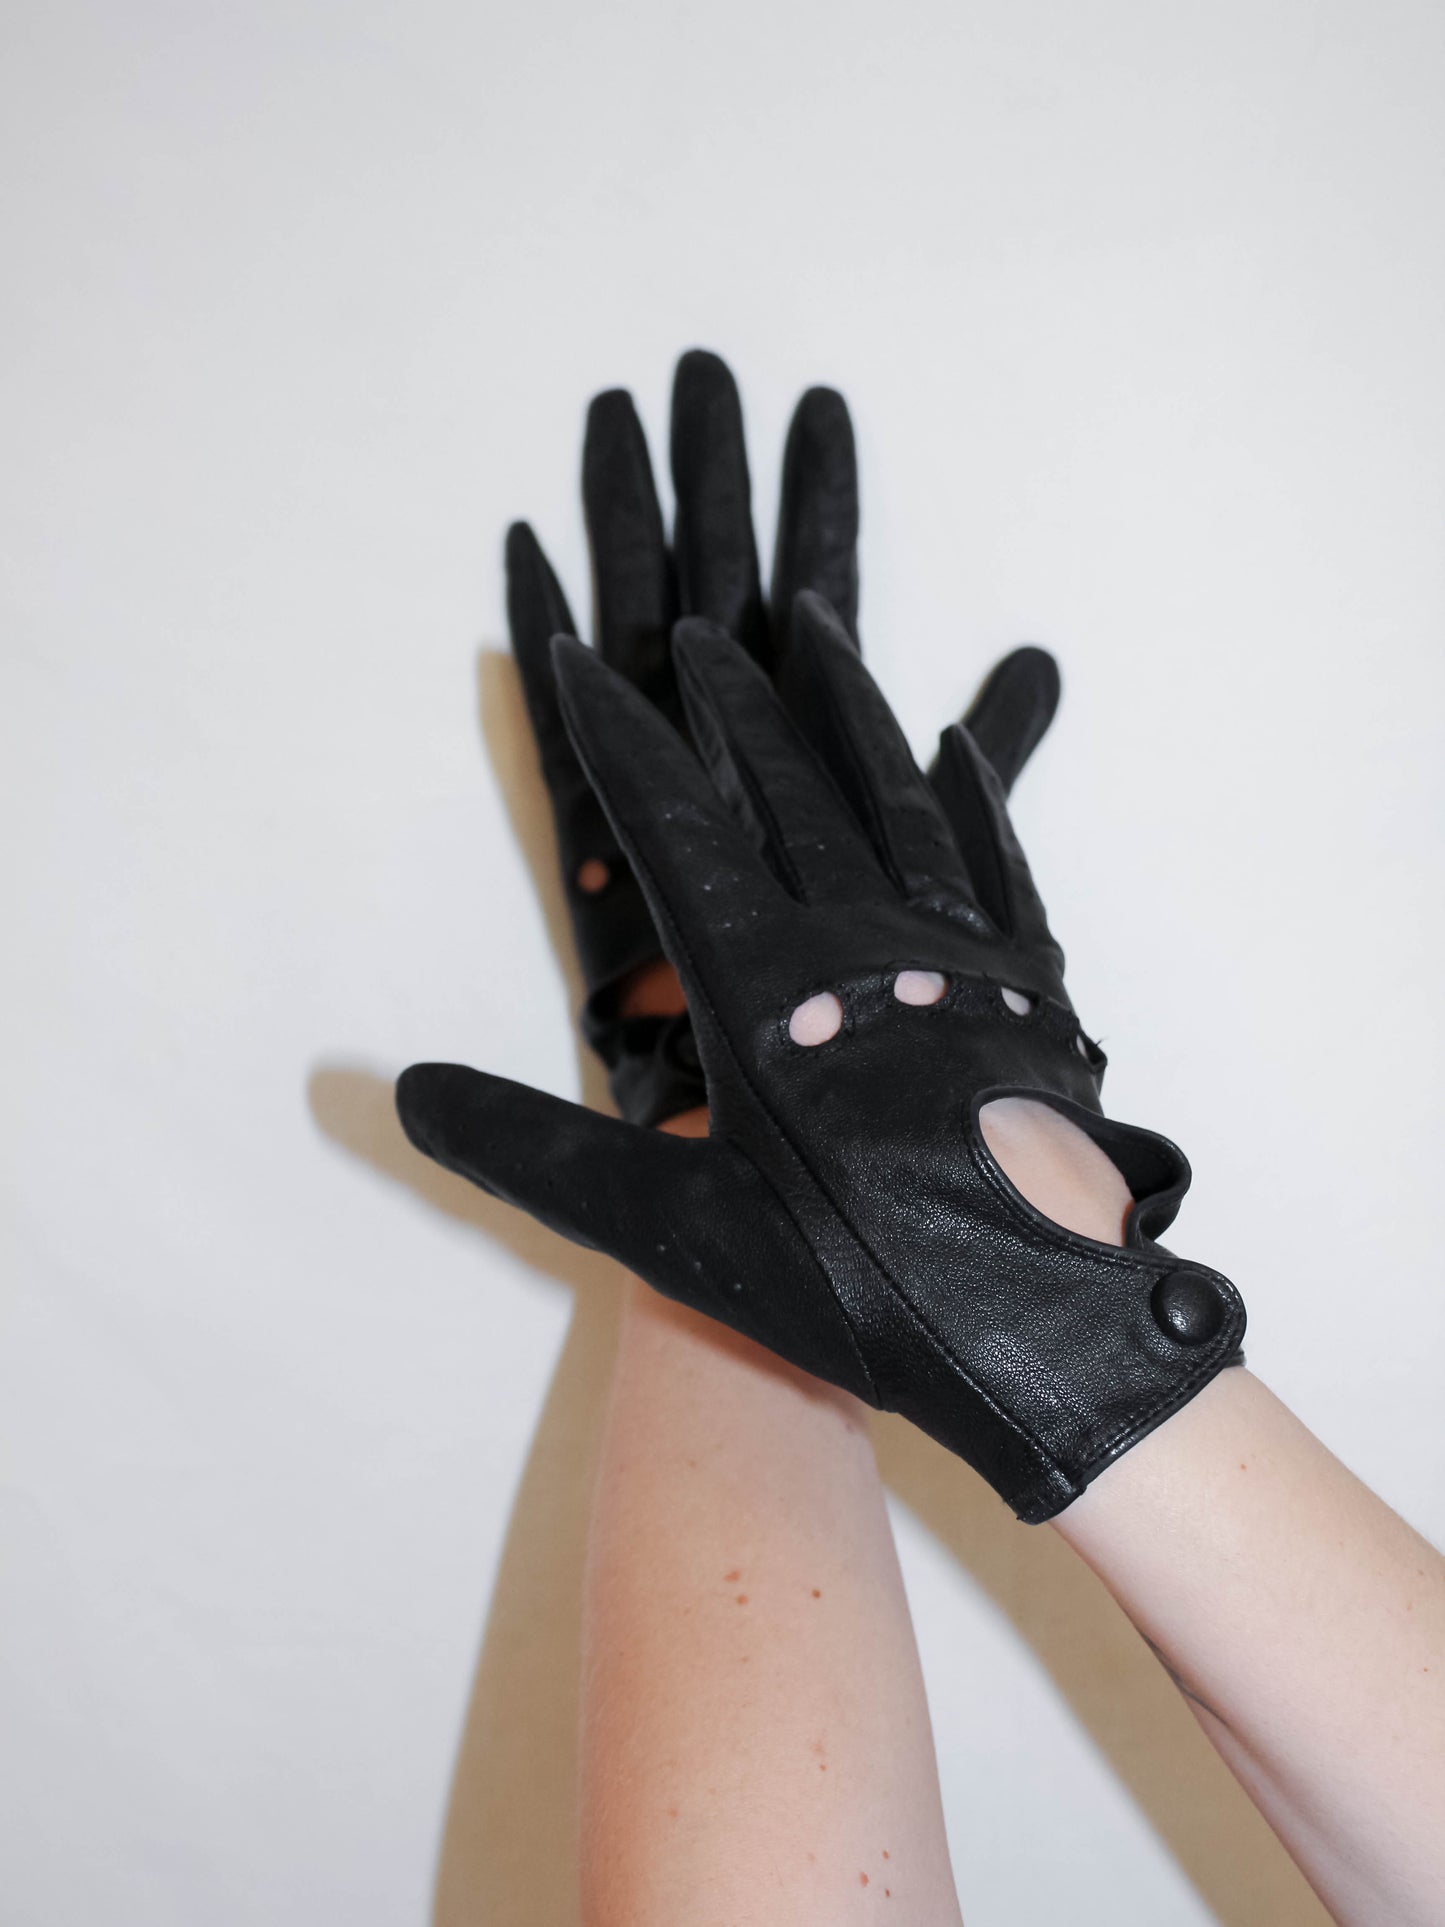 Vintage 80's Don't Mess With Me Black Leather Motorcycle Gloves